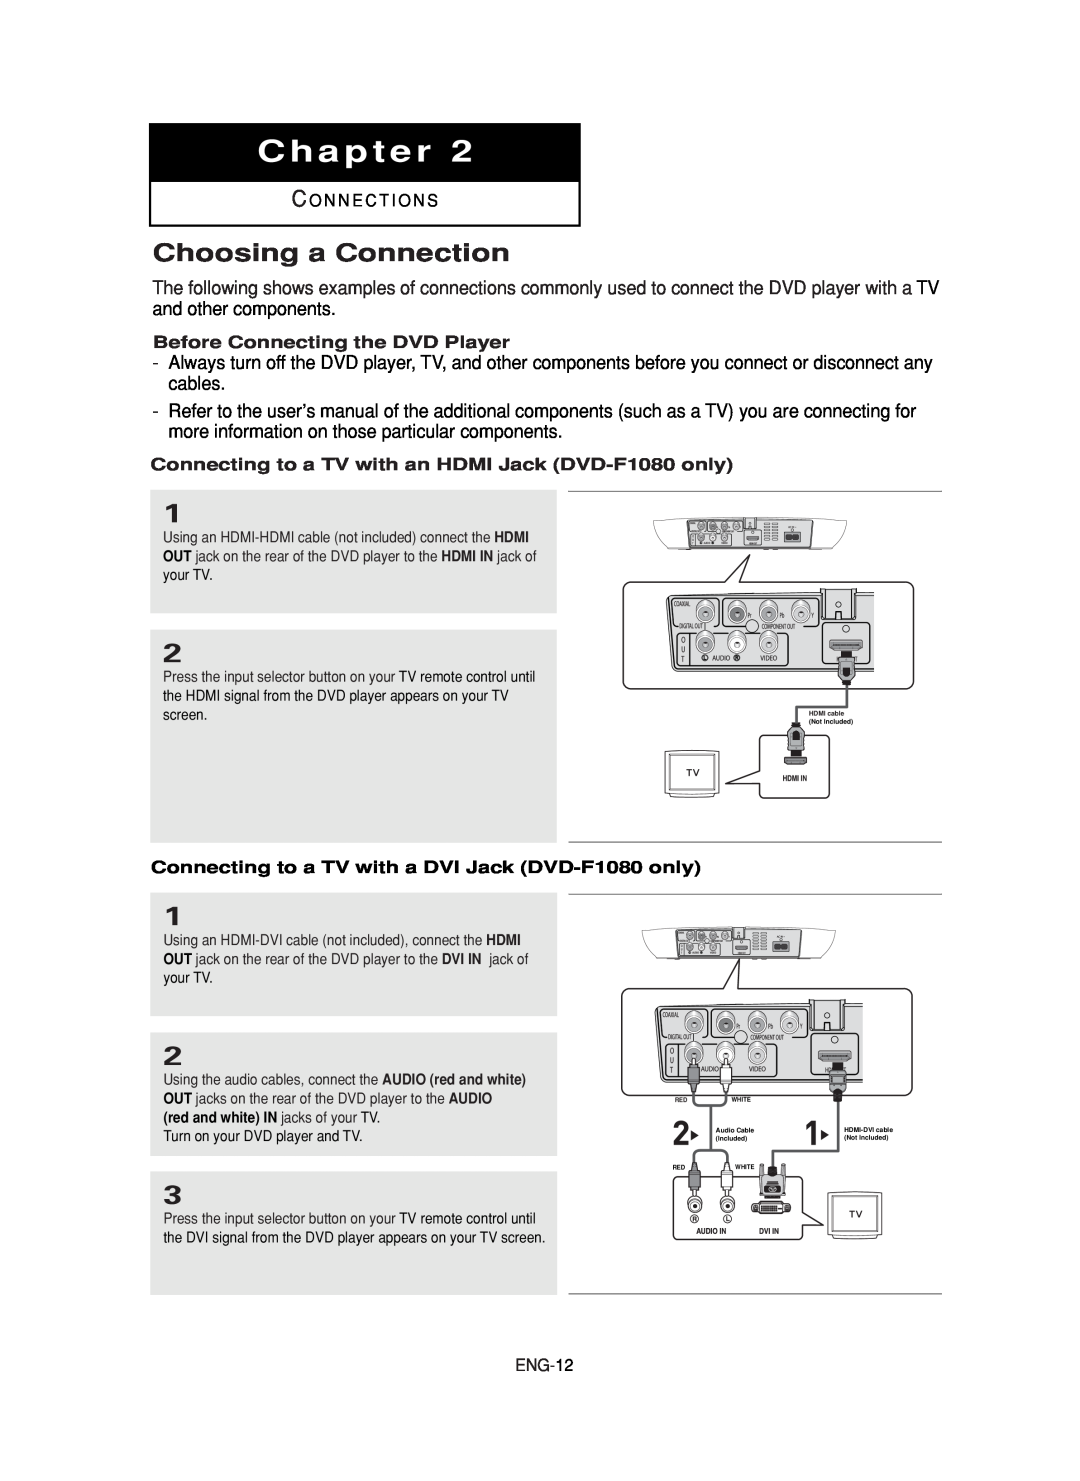 Samsung DVD-FP580 manual Choosing a Connection, Chapter, Connecting to a TV with a DVI Jack DVD-F1080 only 